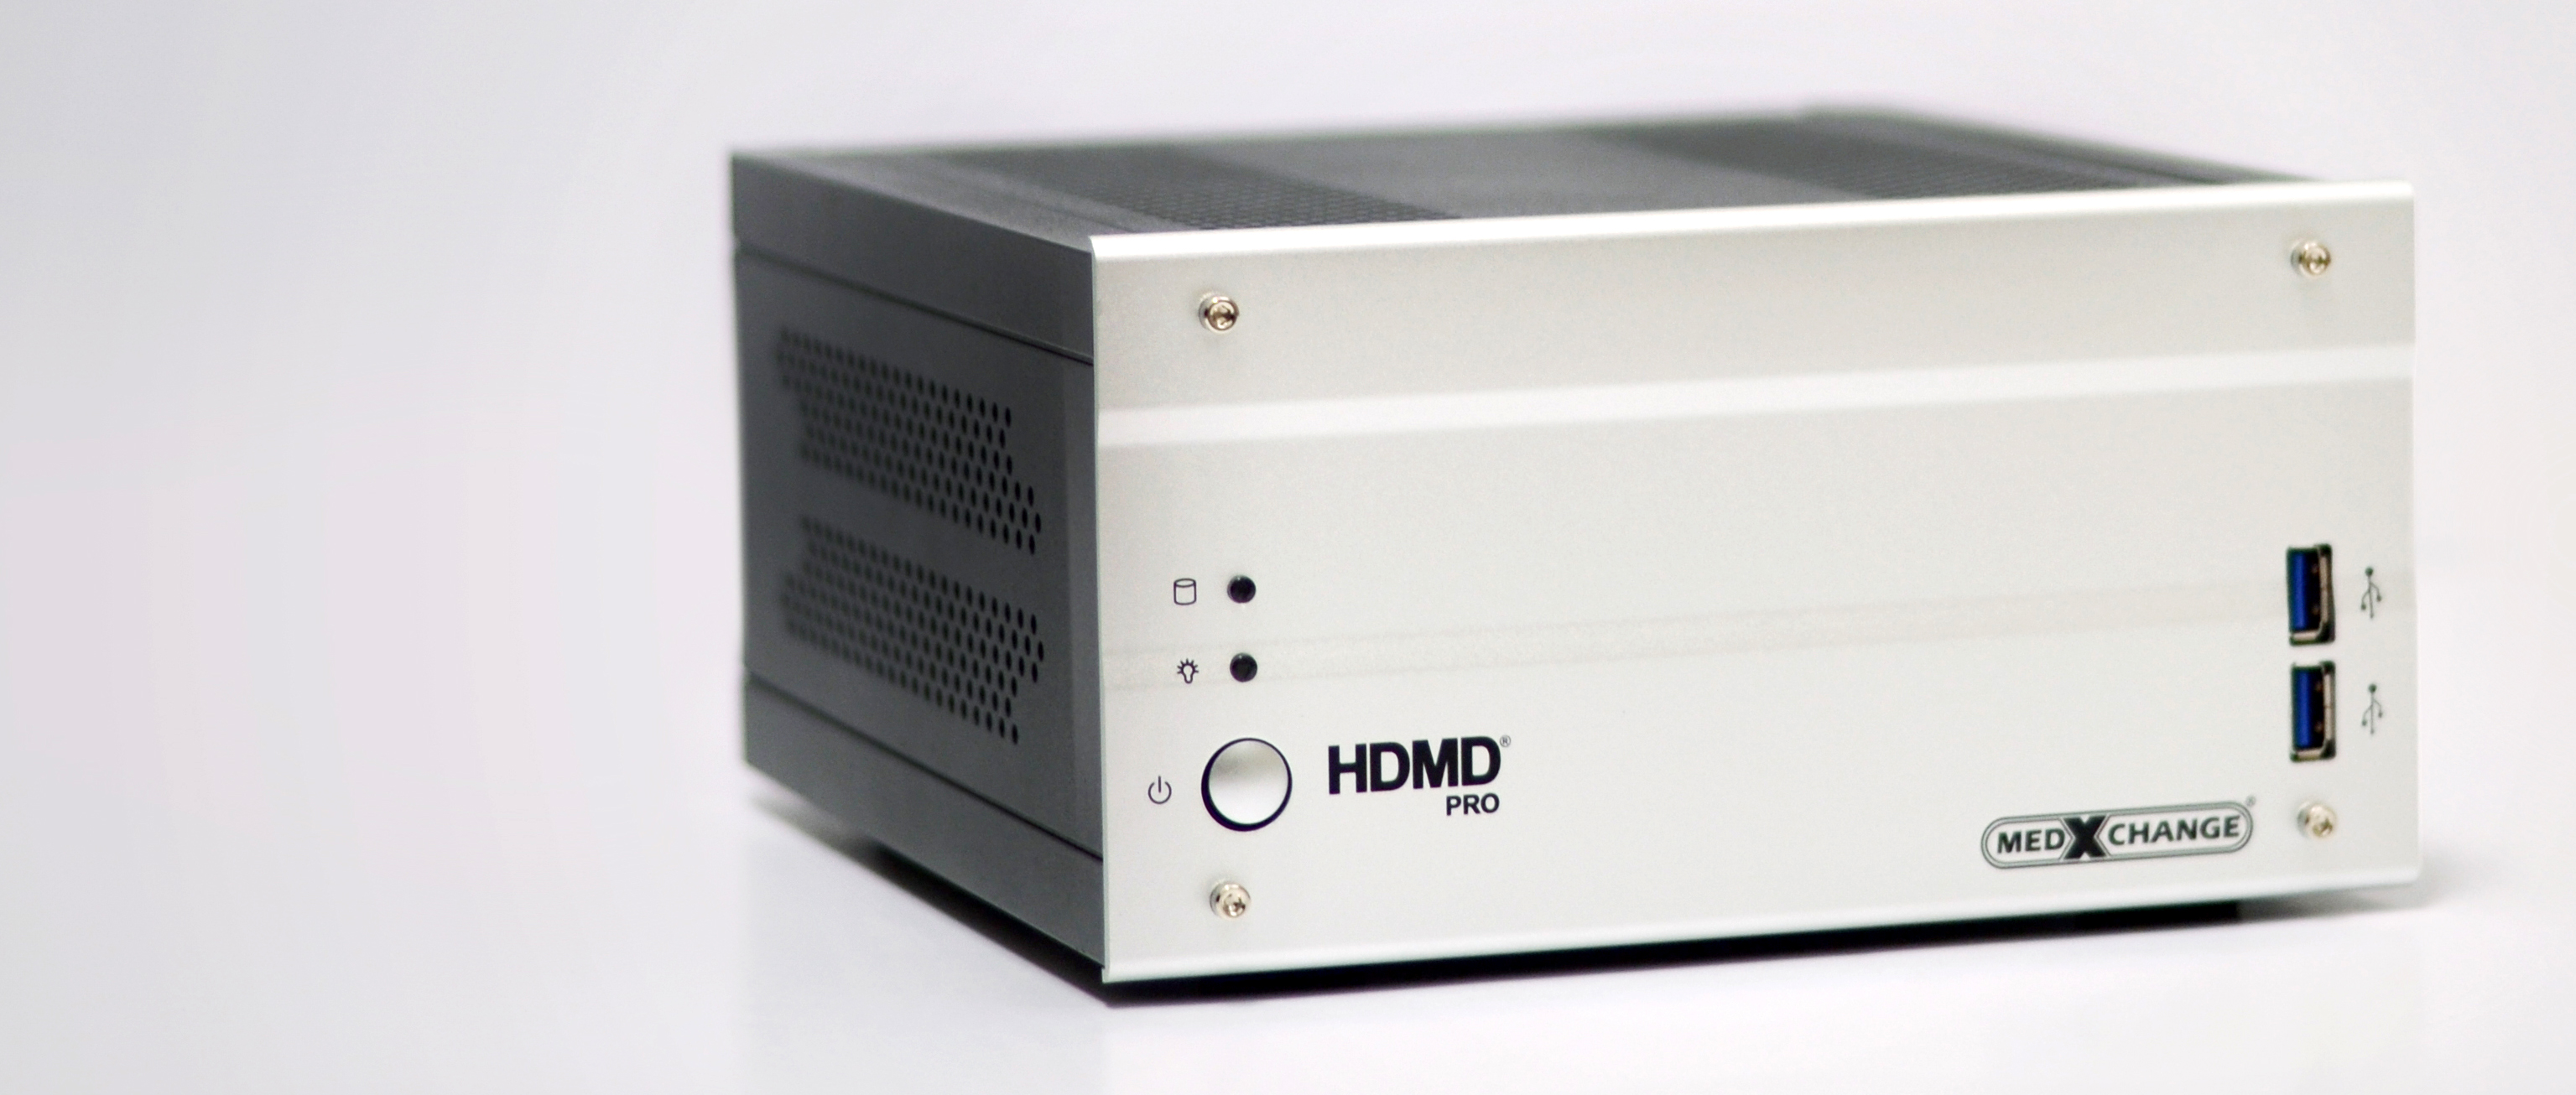 Surgical Video Recording System - HDMD PRO